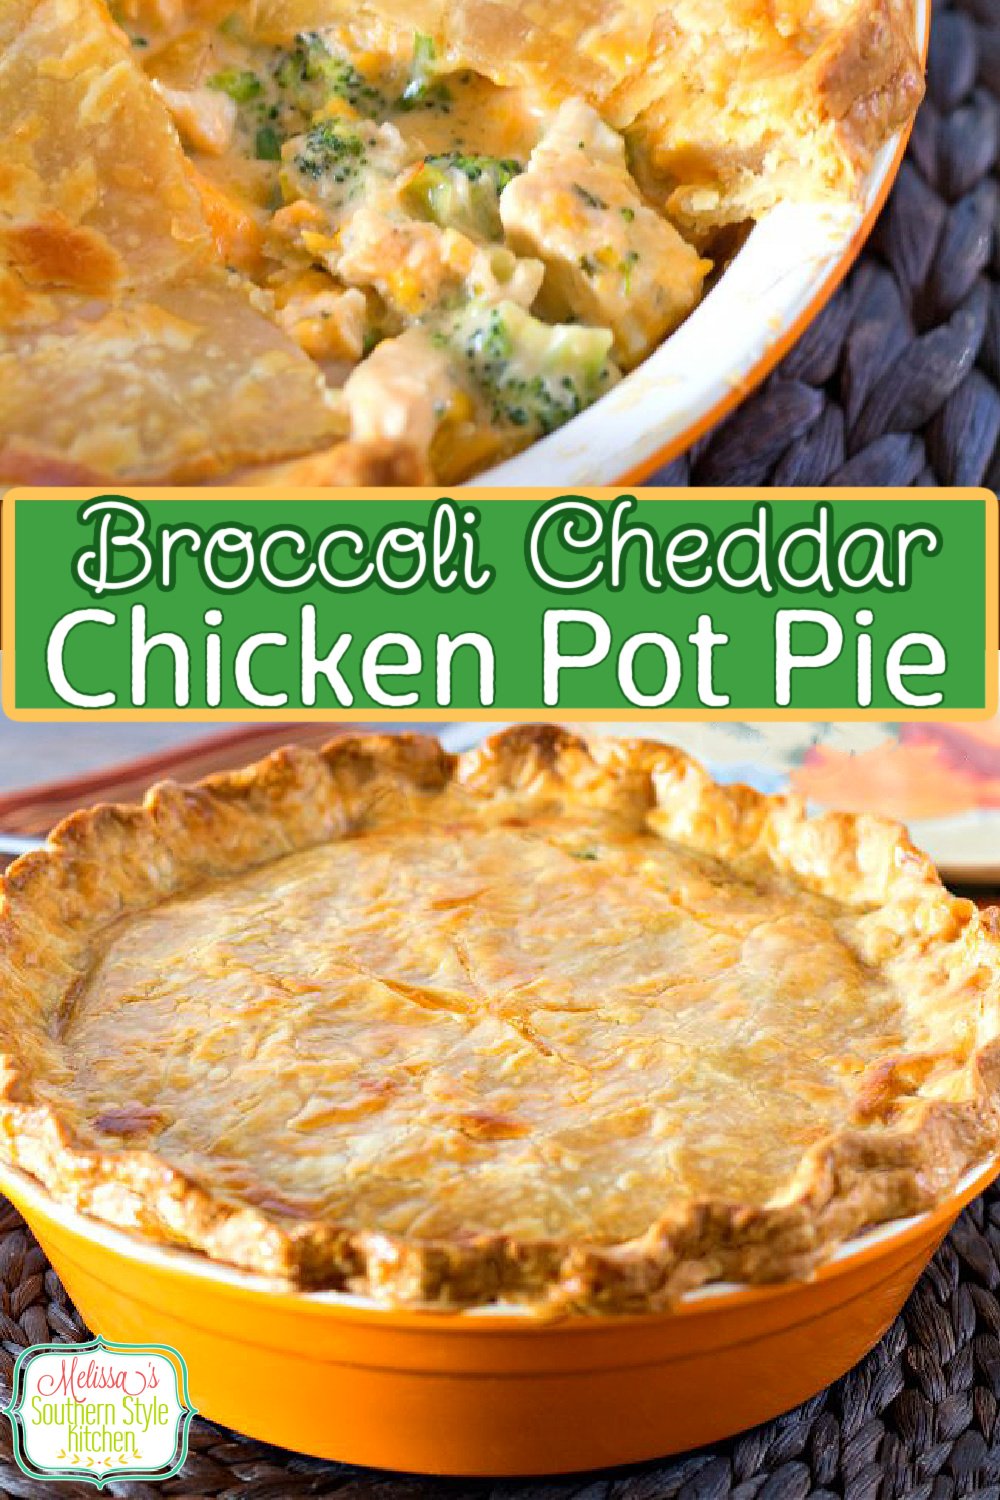 This cheesy Broccoli Cheddar Chicken Pot Pie is a delicious twist on a comfort food classic. #chickenpotpie #broccolicheddar #easychickenrecipes #chickenrecipes #broccolicheddarchicken #dinner #dinnerideas #southernfood #southernrecipes via @melissasssk